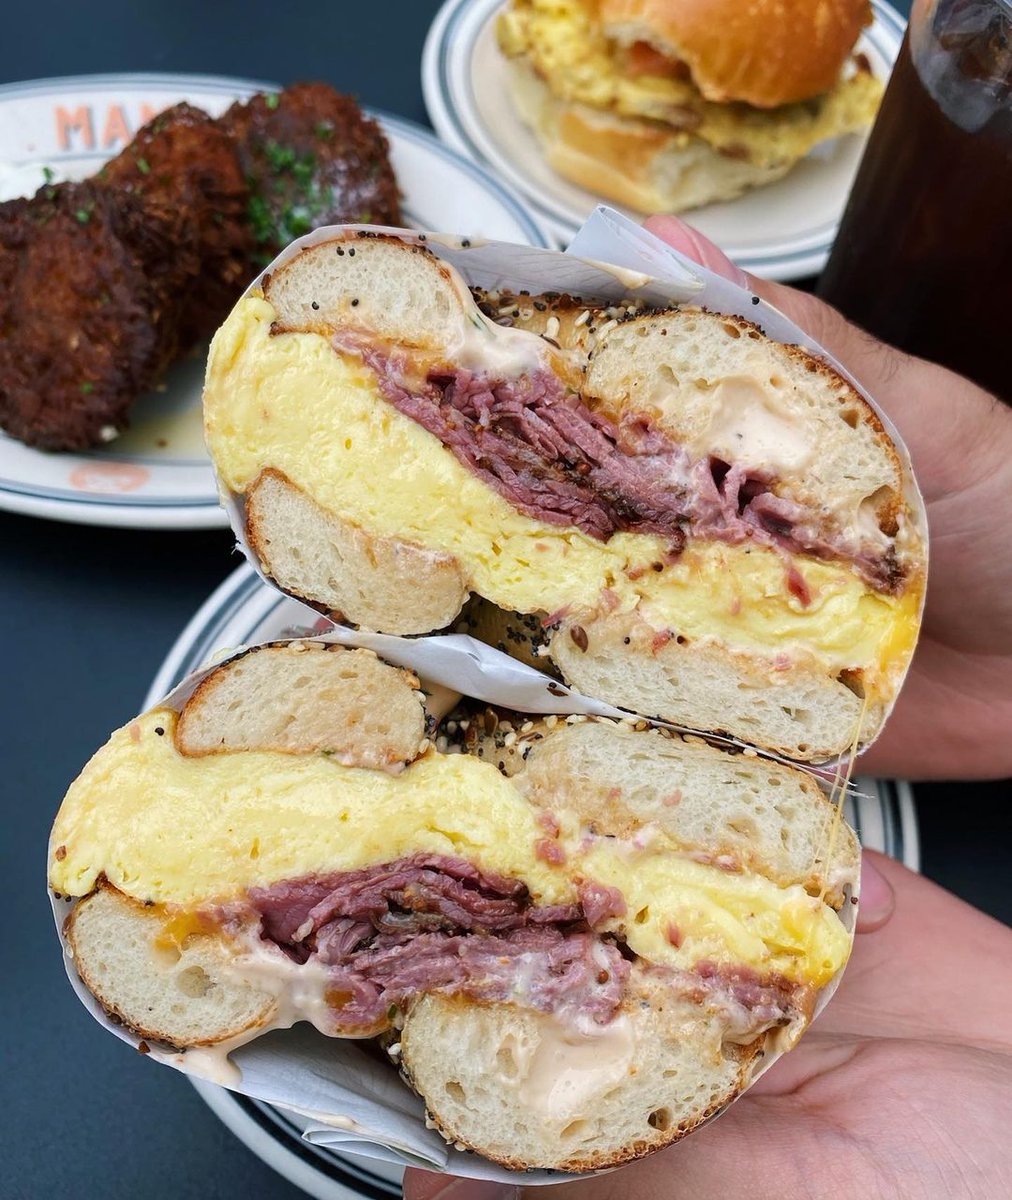 Sometimes you just need some emotional support pastrami to make it through the week. 🤷 @mamalehs

📸: @sistersnacking